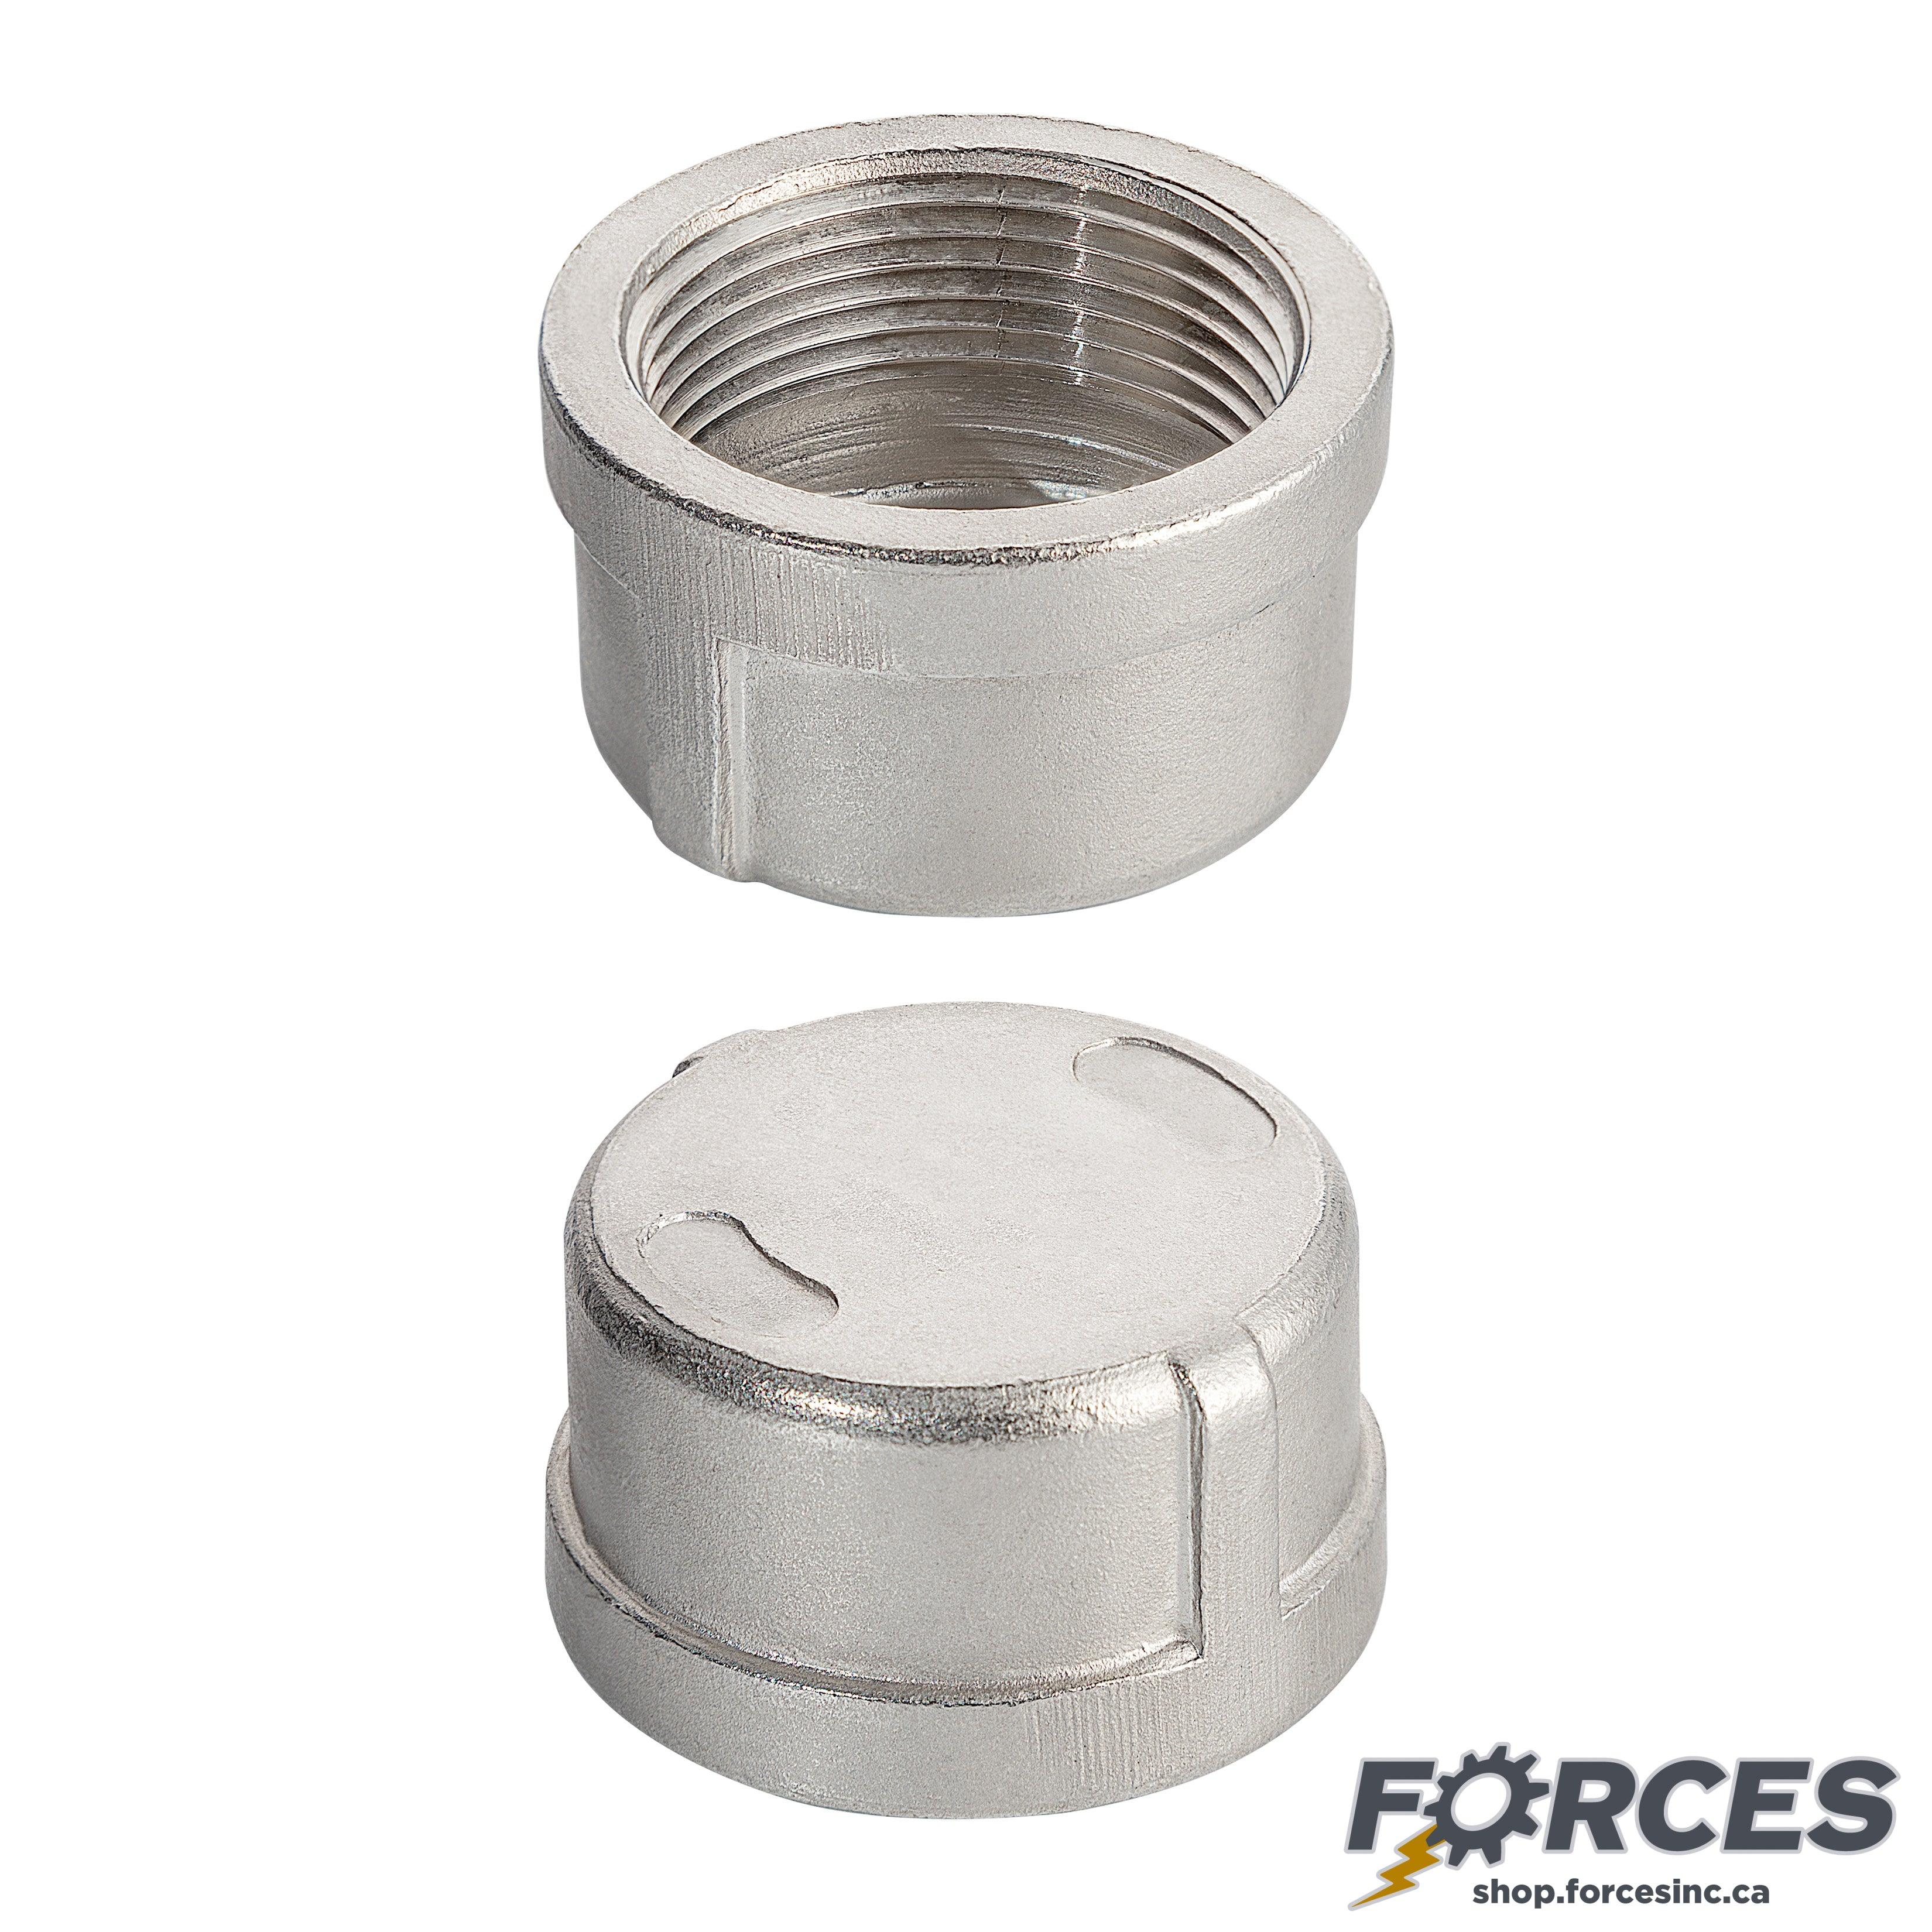 2-1/2" Cap NPT #150 - Stainless Steel 316 - Forces Inc